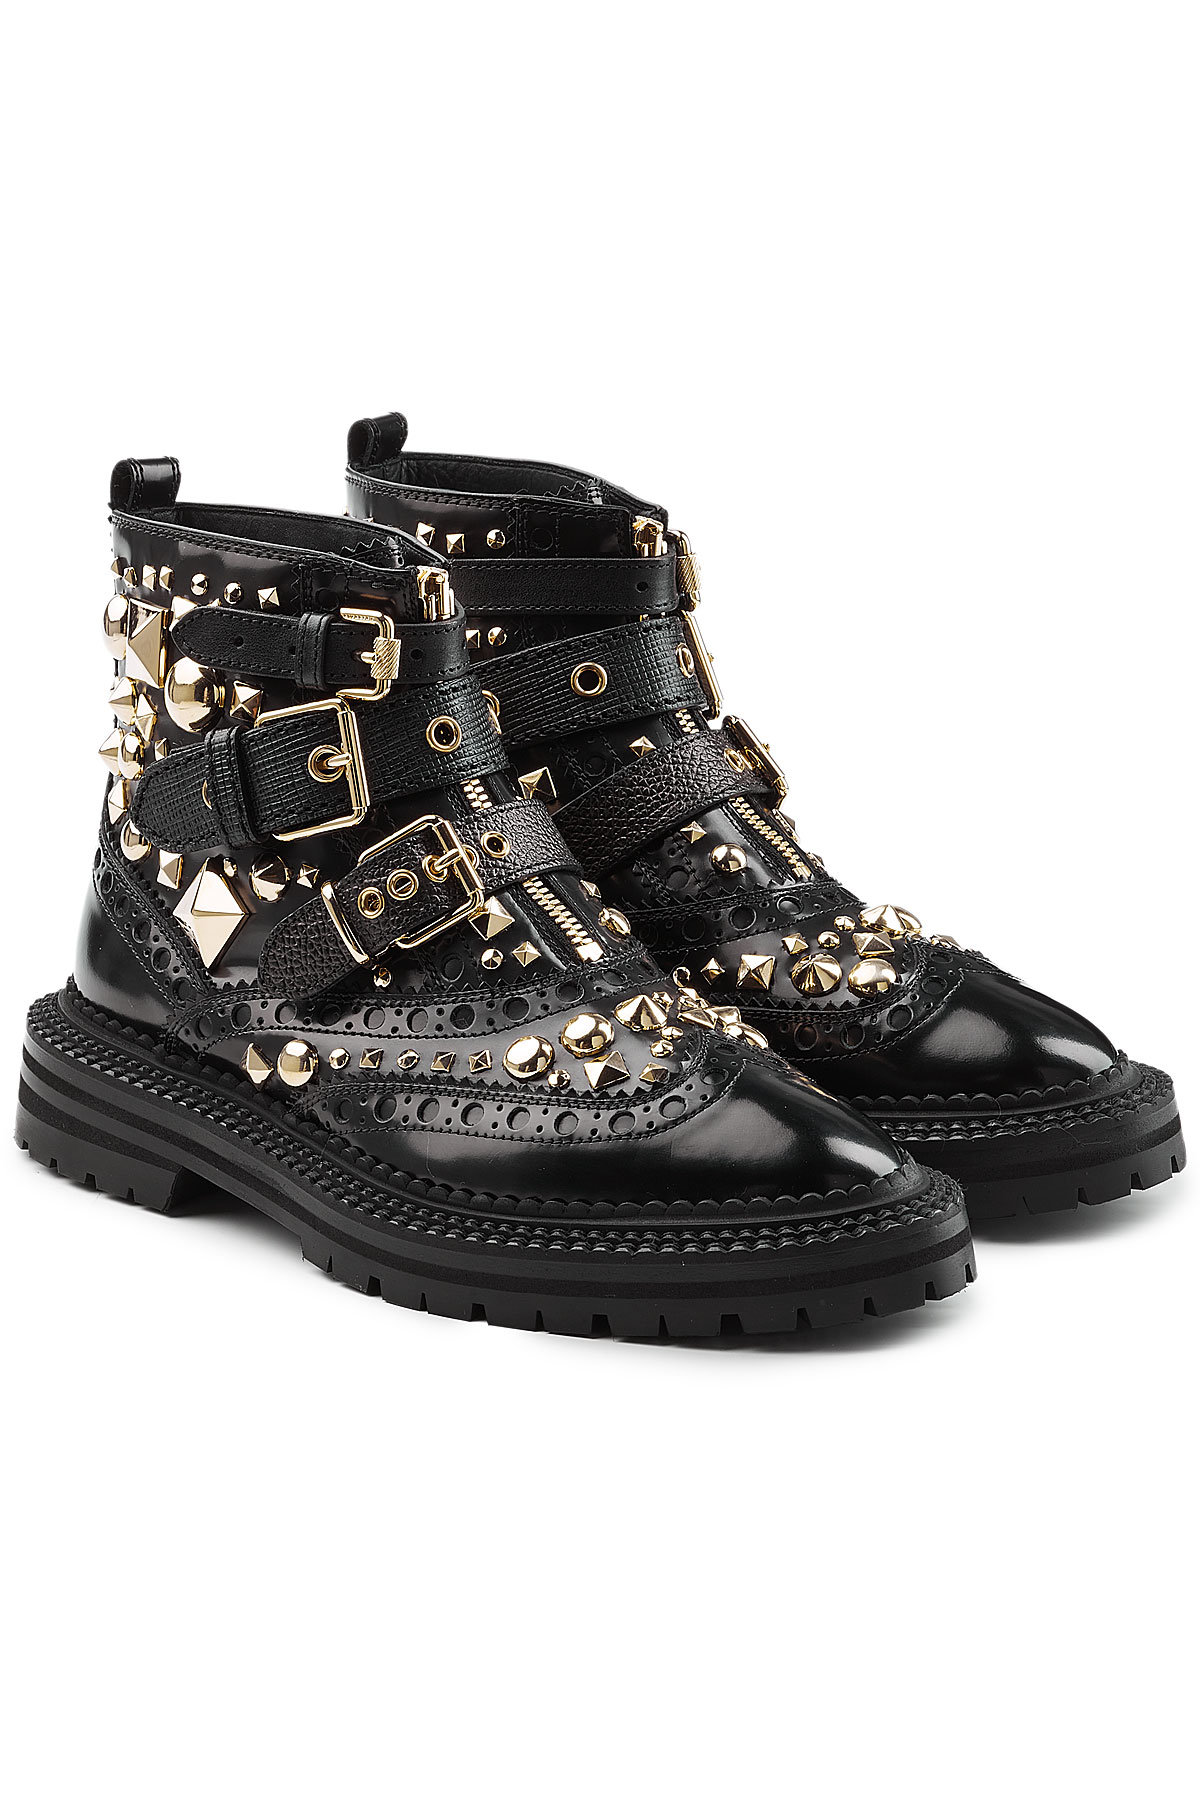 Burberry - Studded Leather Brogue Ankle Boots